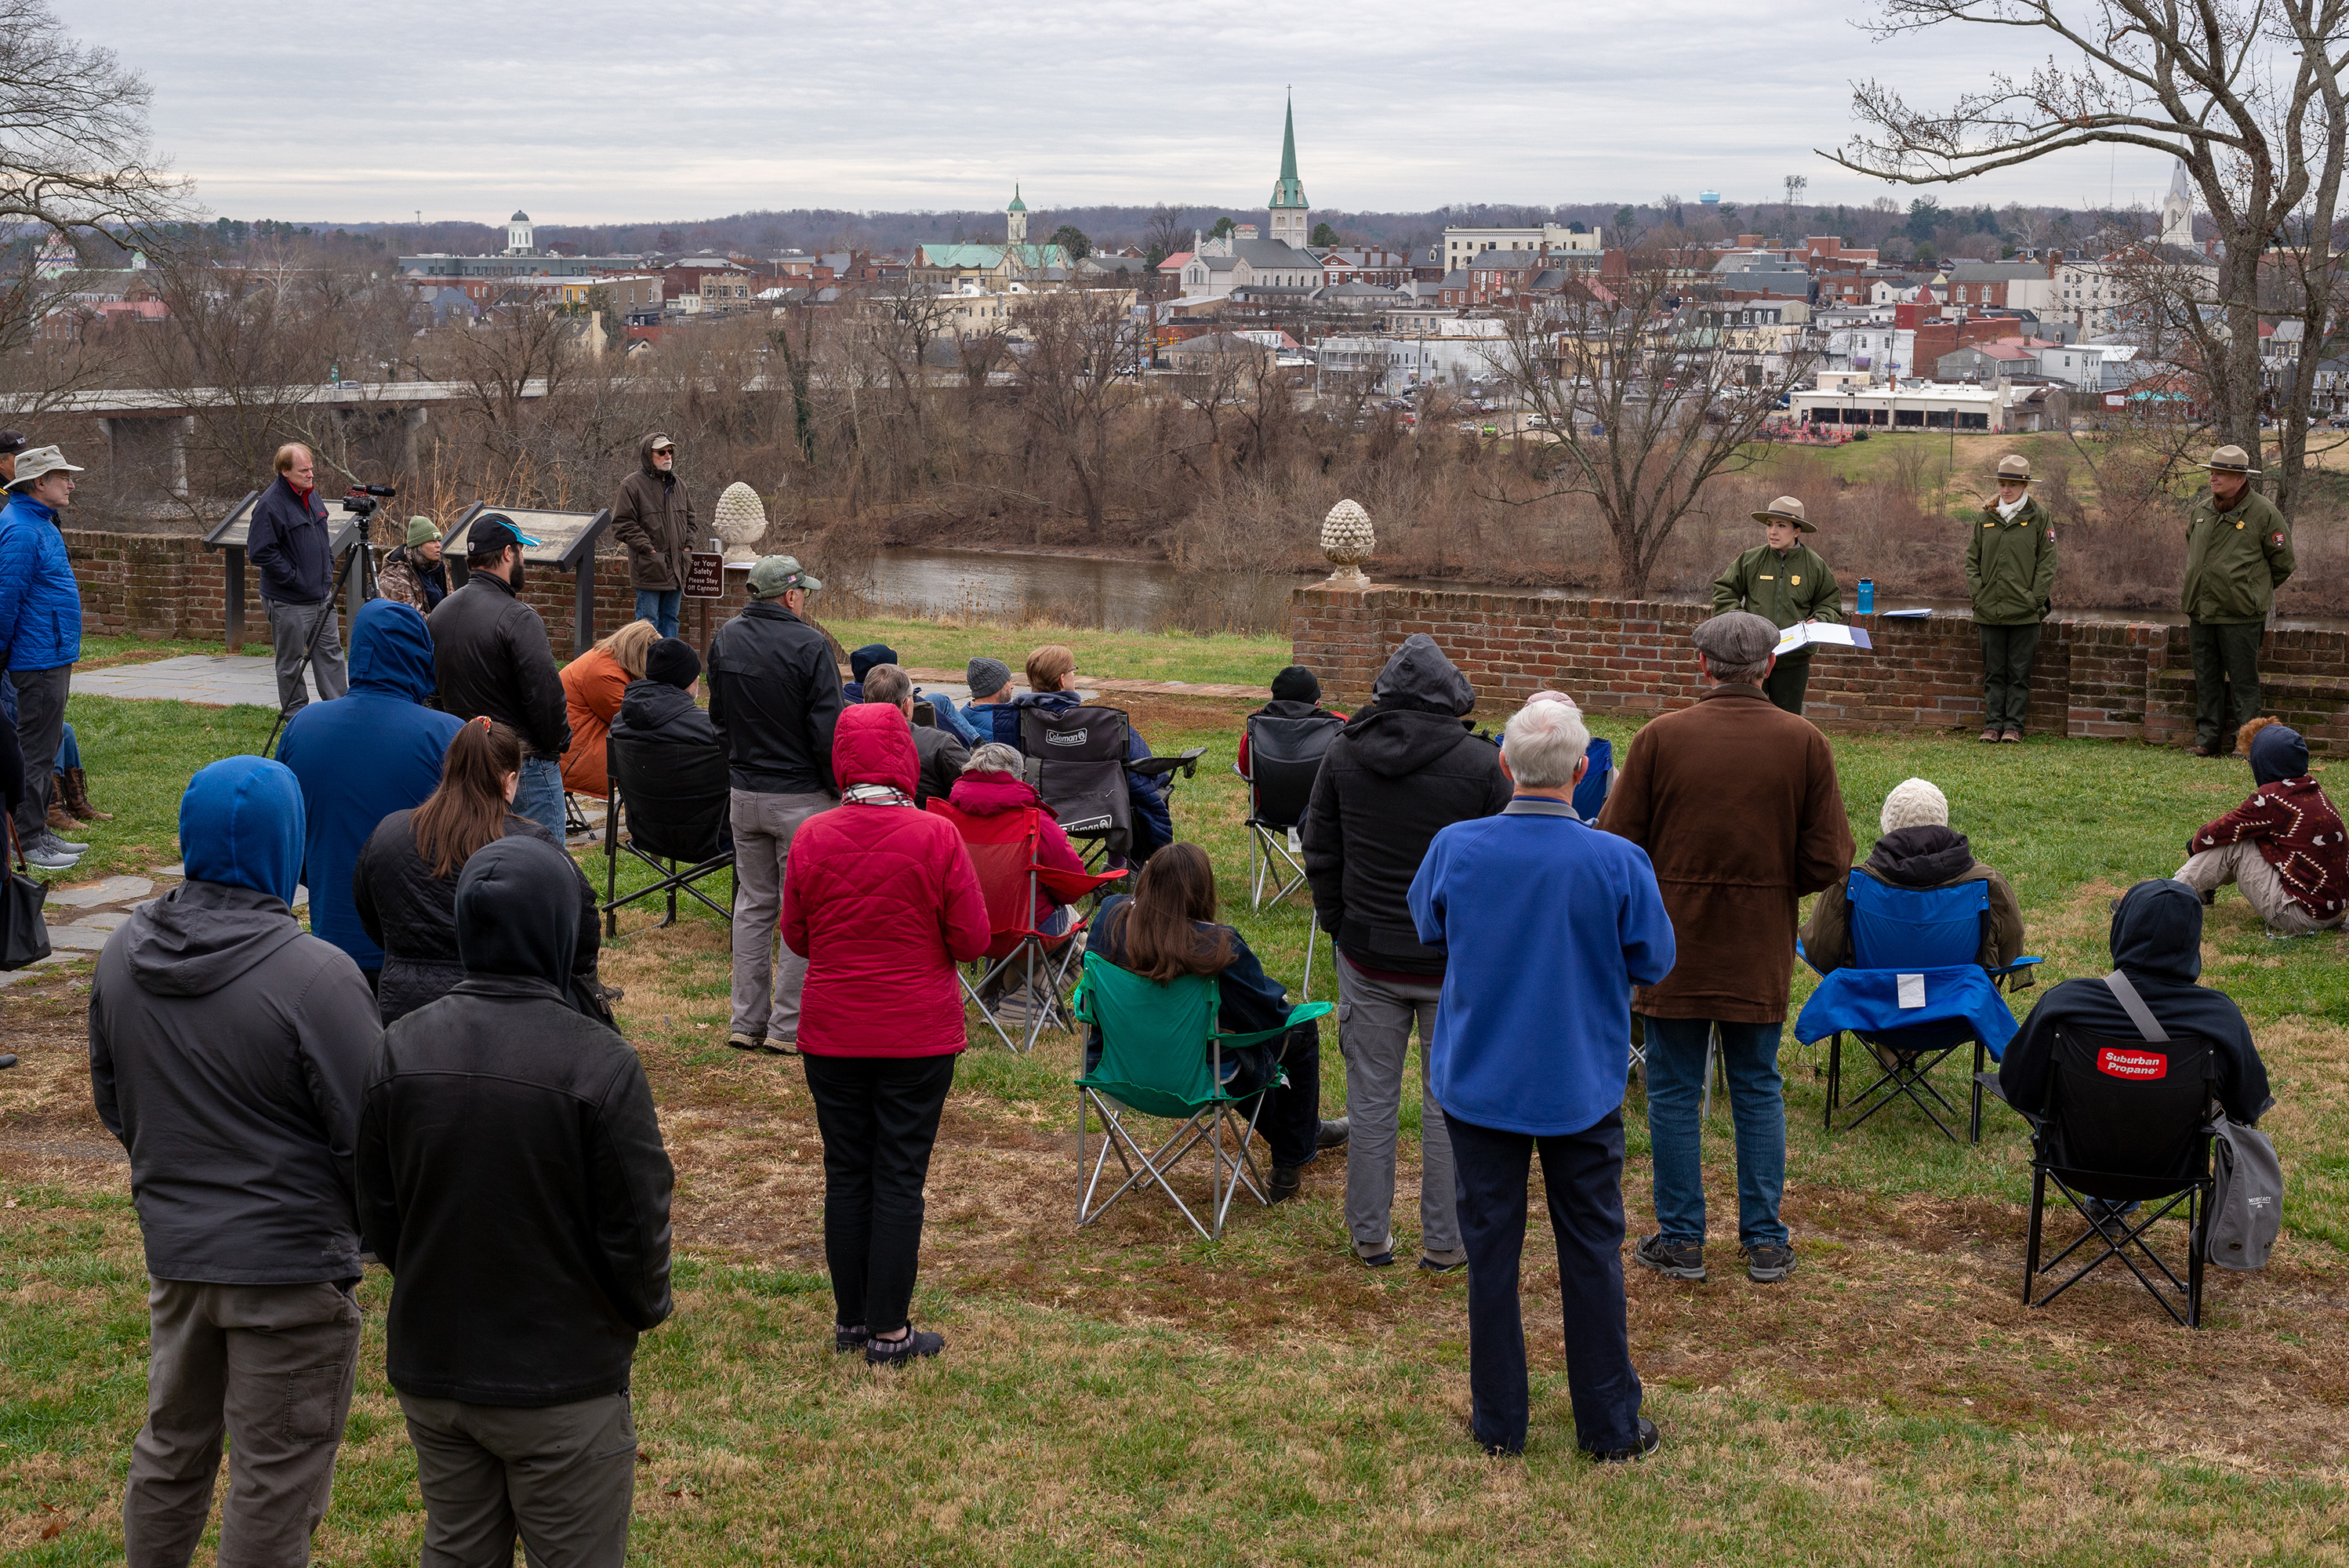 A female park ranger speaks to a group of 50 people on a lawn overlooking a river across from Frederickburg.